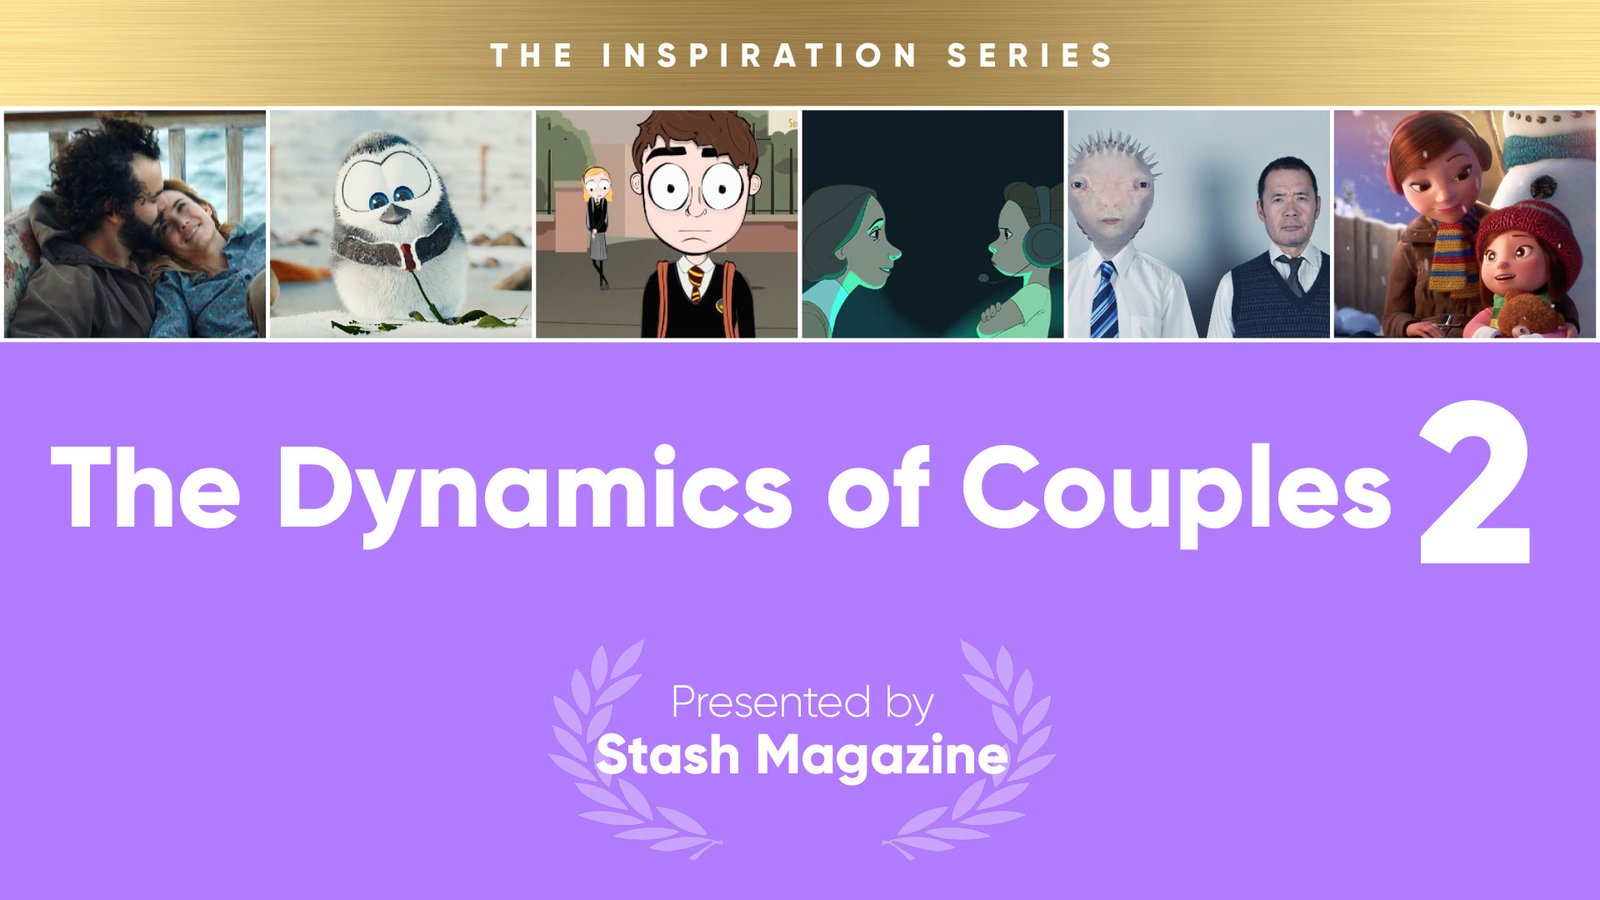 The Inspiration Series: The Dynamics of Couples 2